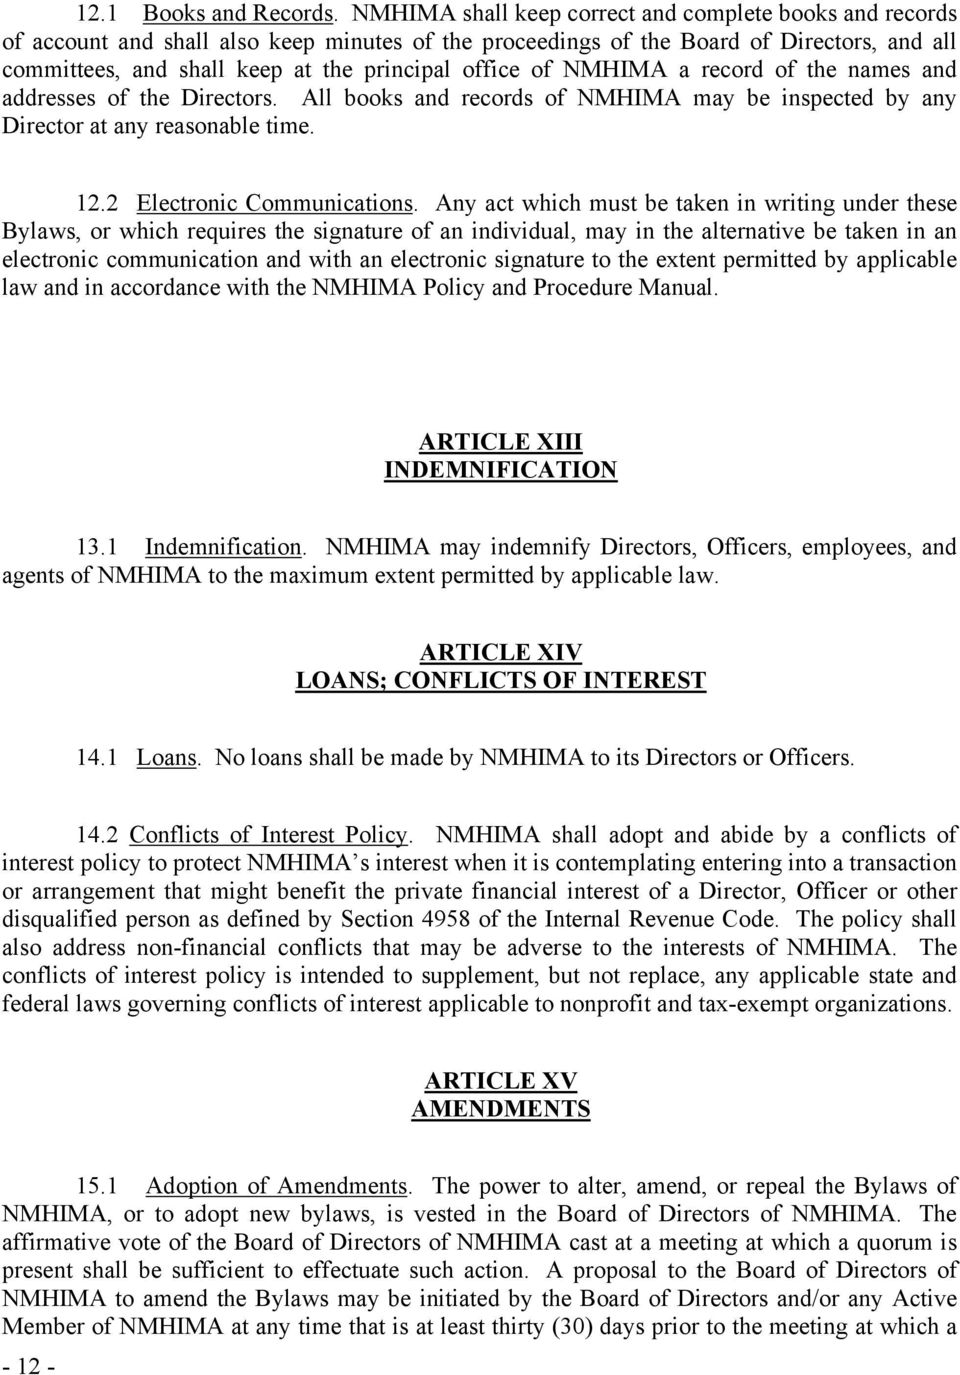 office of NMHIMA a record of the names and addresses of the Directors. All books and records of NMHIMA may be inspected by any Director at any reasonable time. 12.2 Electronic Communications.